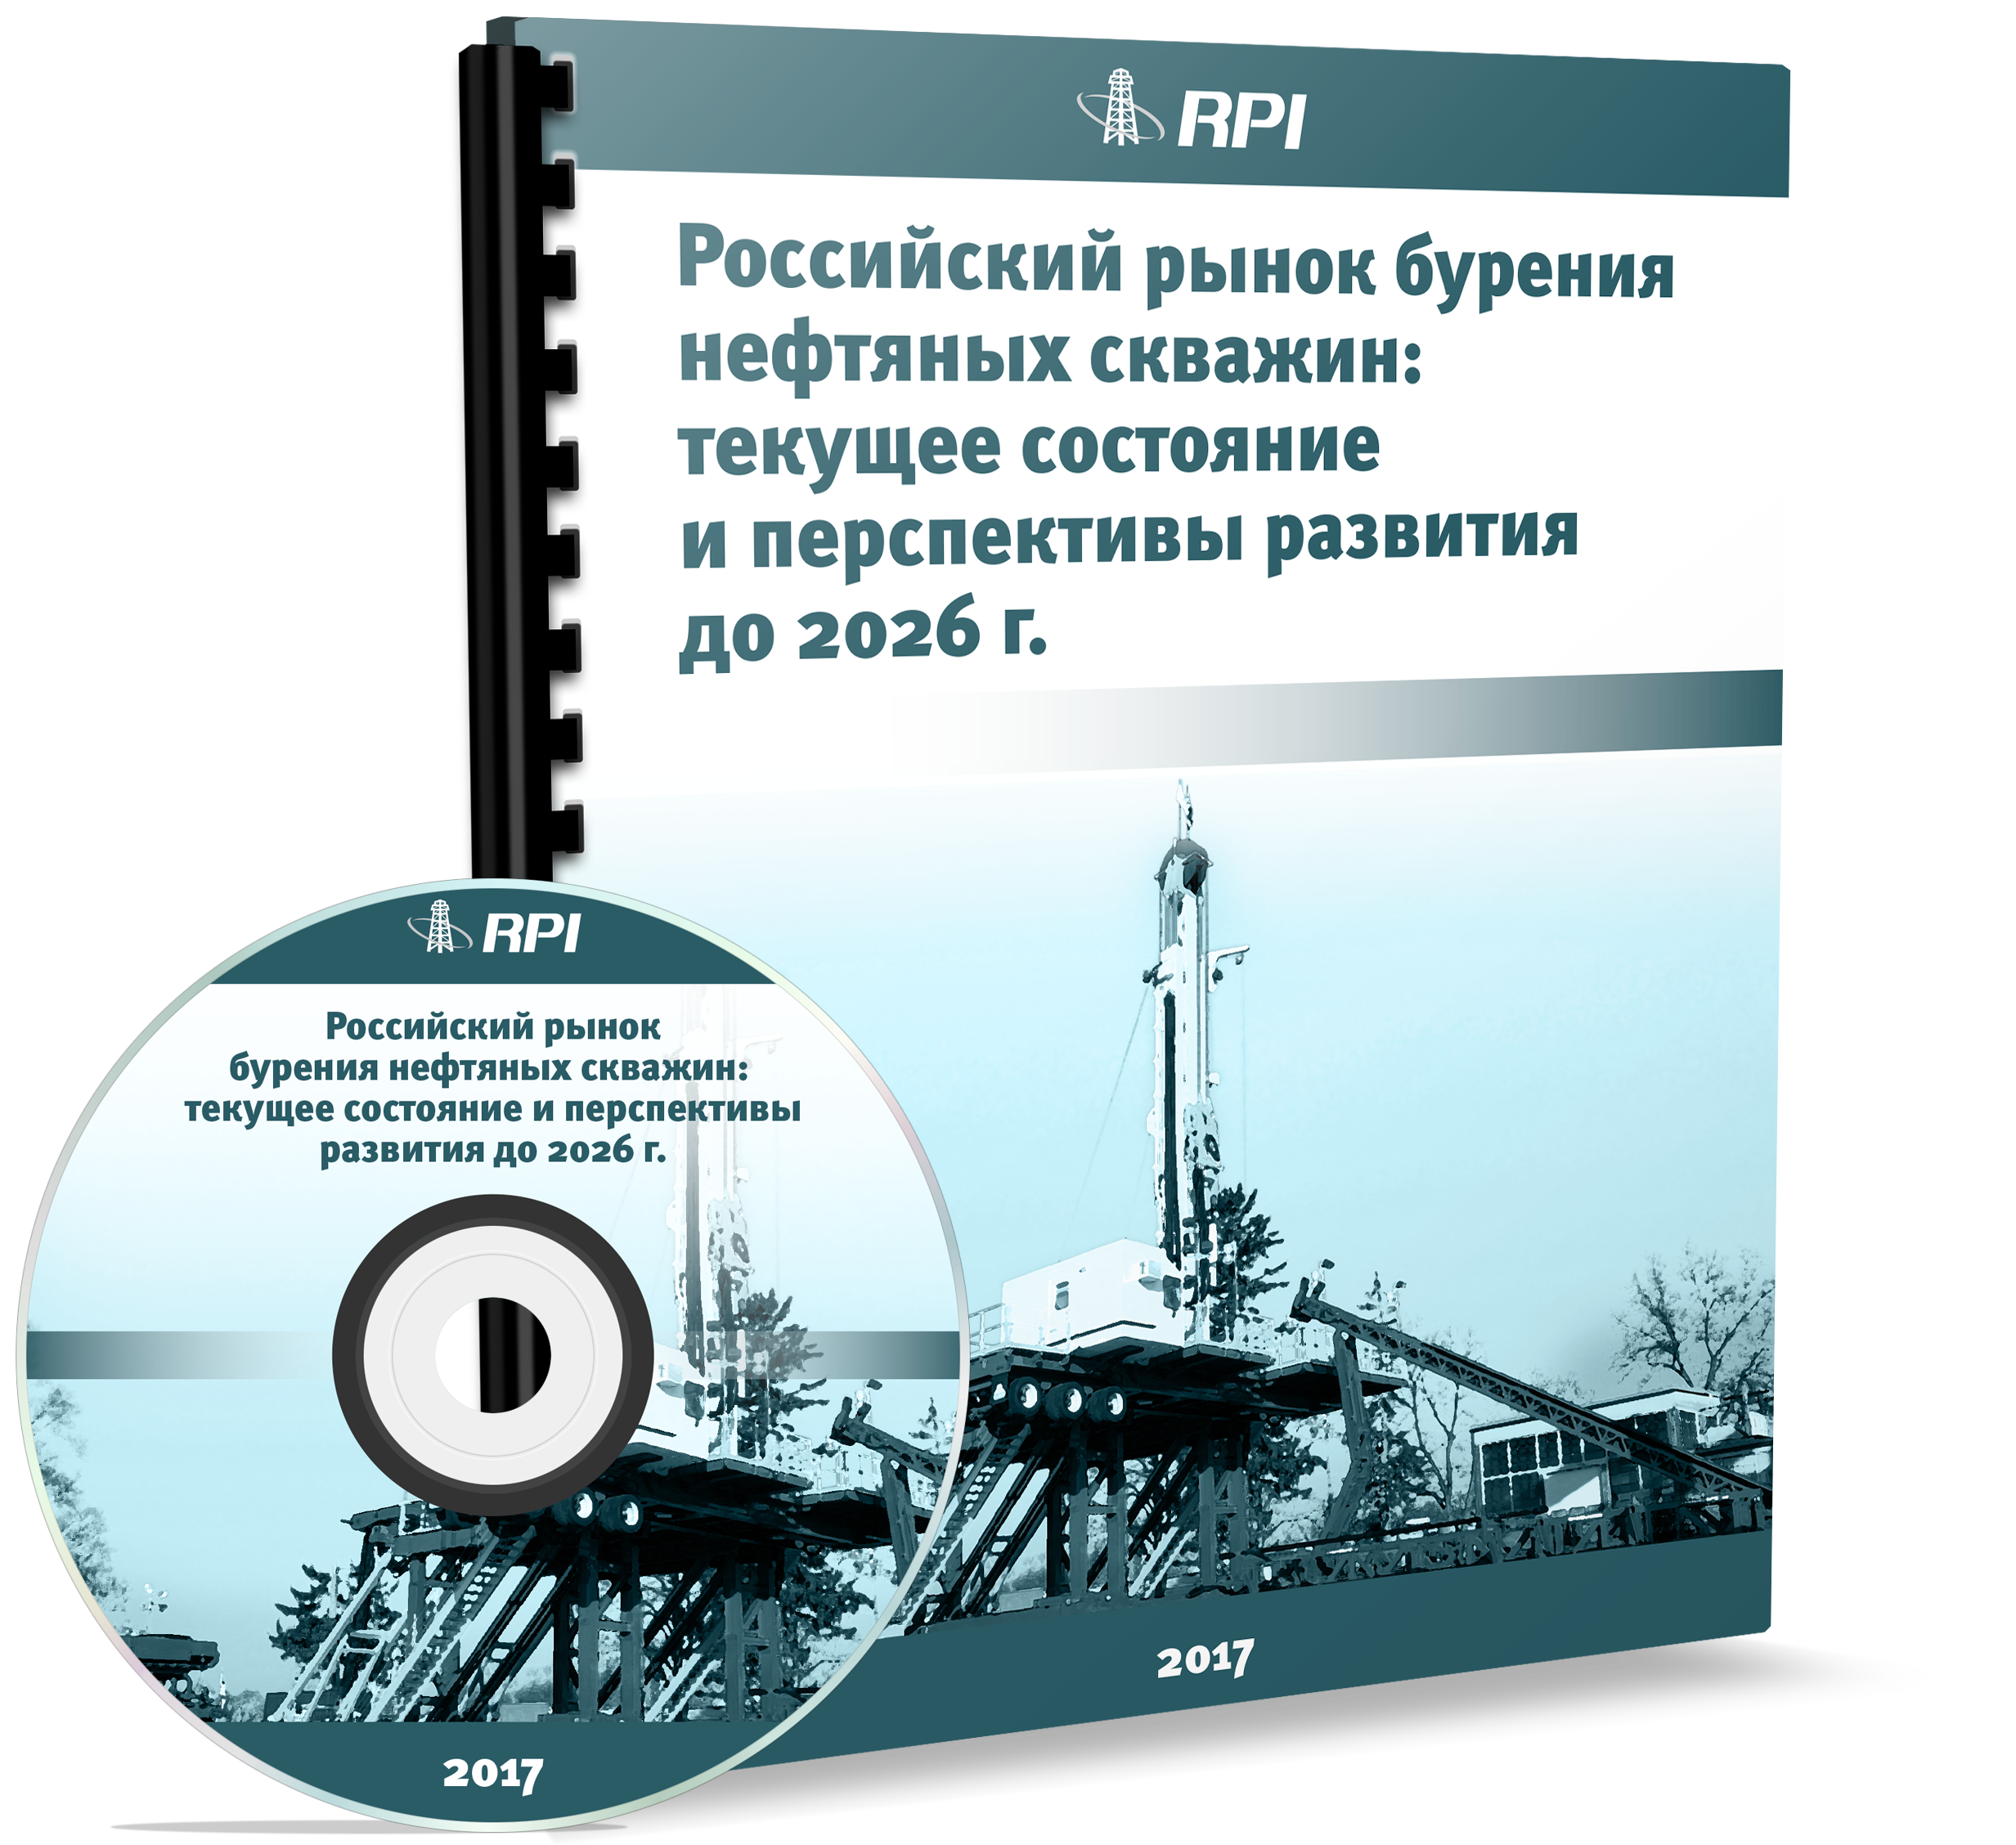 Russian Oil Drilling Market: Current Situation and Development Prospects through 2026